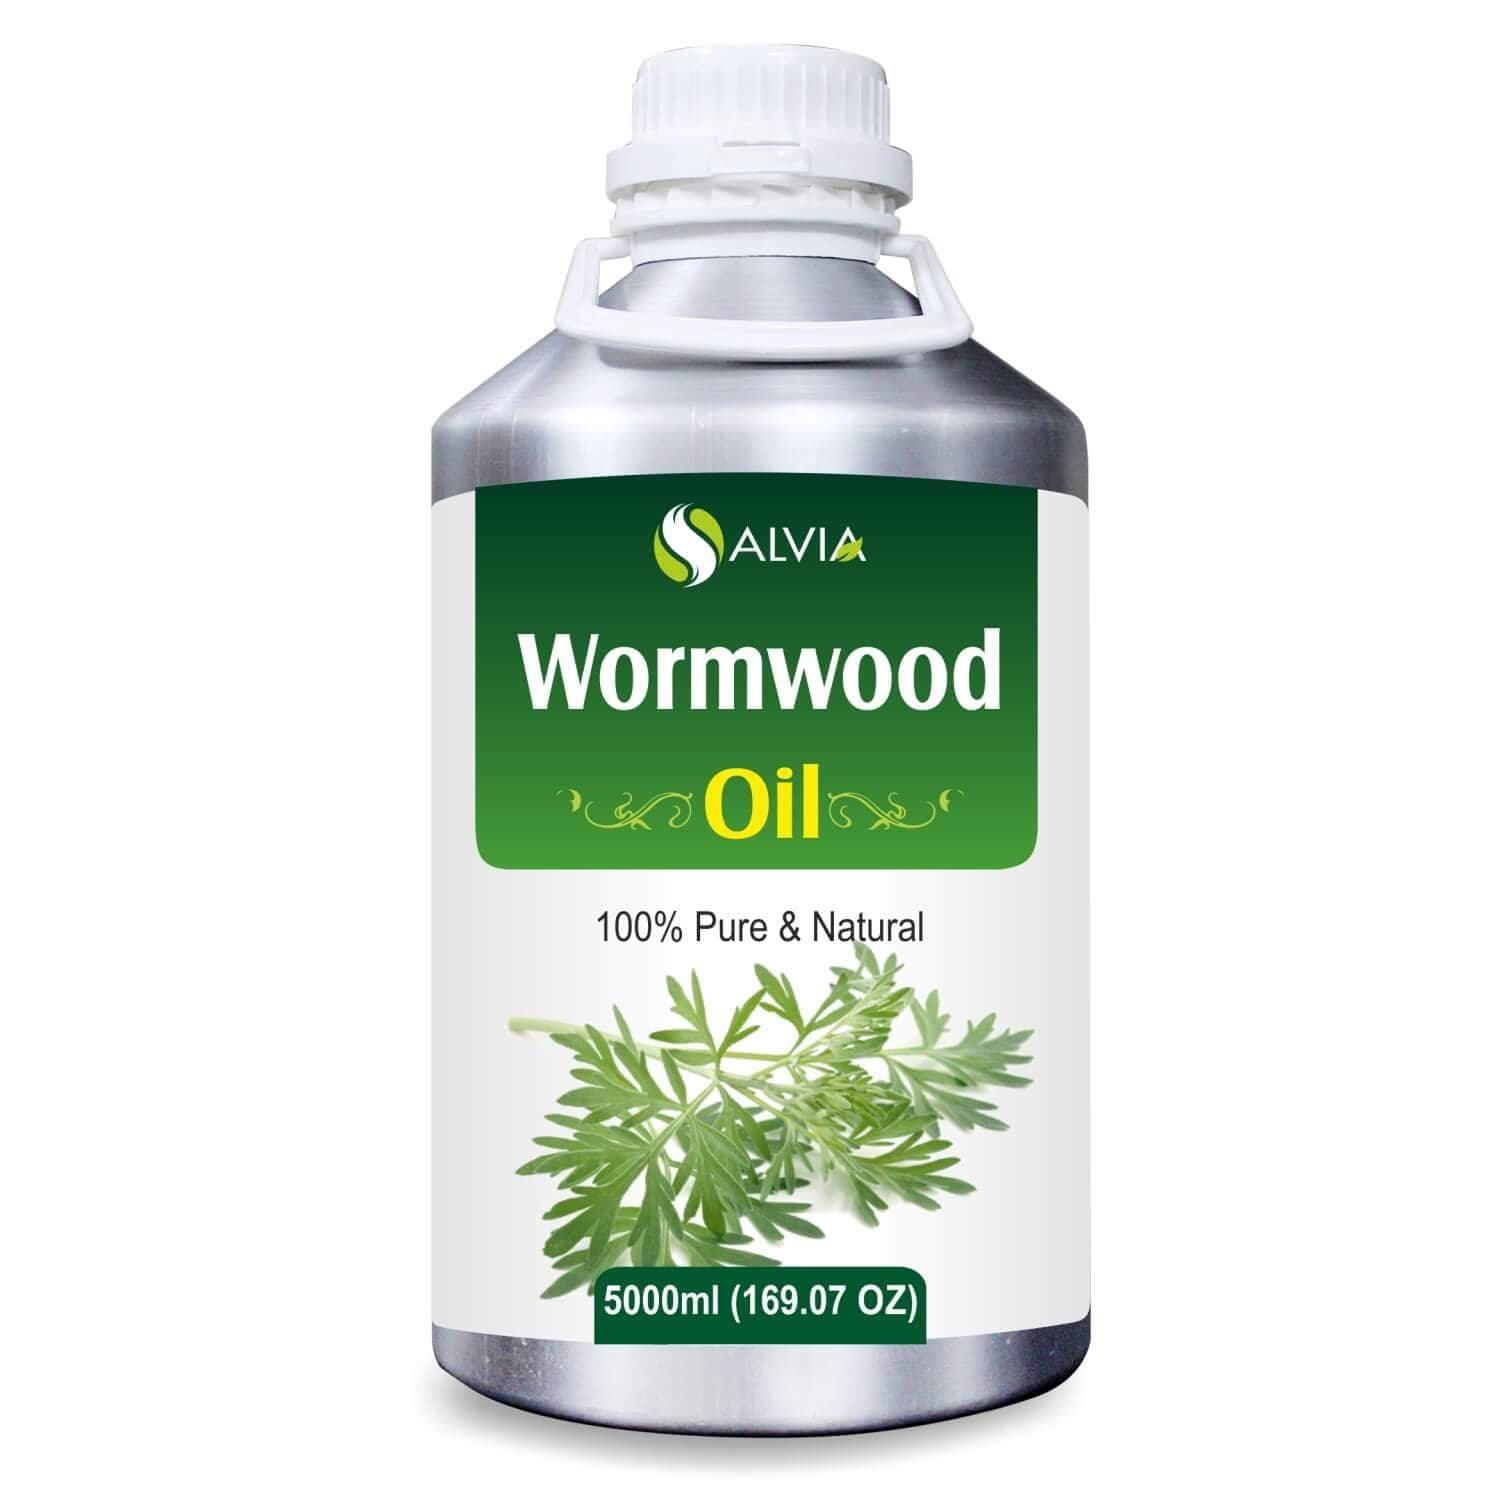 Salvia Natural Essential Oils 5000ml Wormwood Oil (Artemisia Absinthium) 100% Natural Pure Essential Oil Reduces Pain, Heals Wounds & Insect Bites, Soothes Skin Irritation & Itchiness